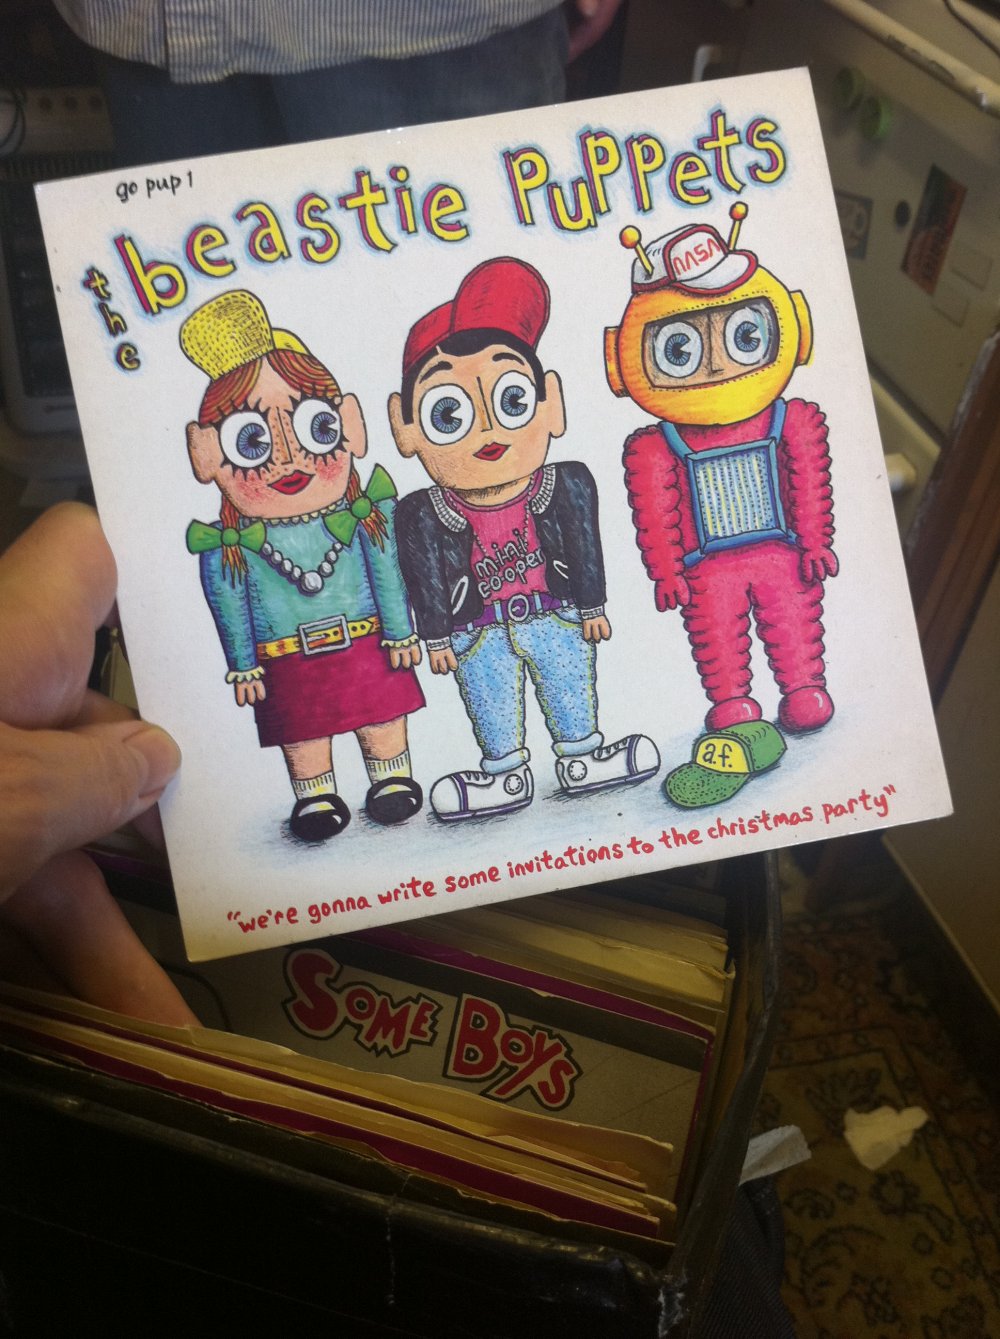 The Beastie Puppets – a rare Frank Sidebottom record. Copies were pressed but never released.